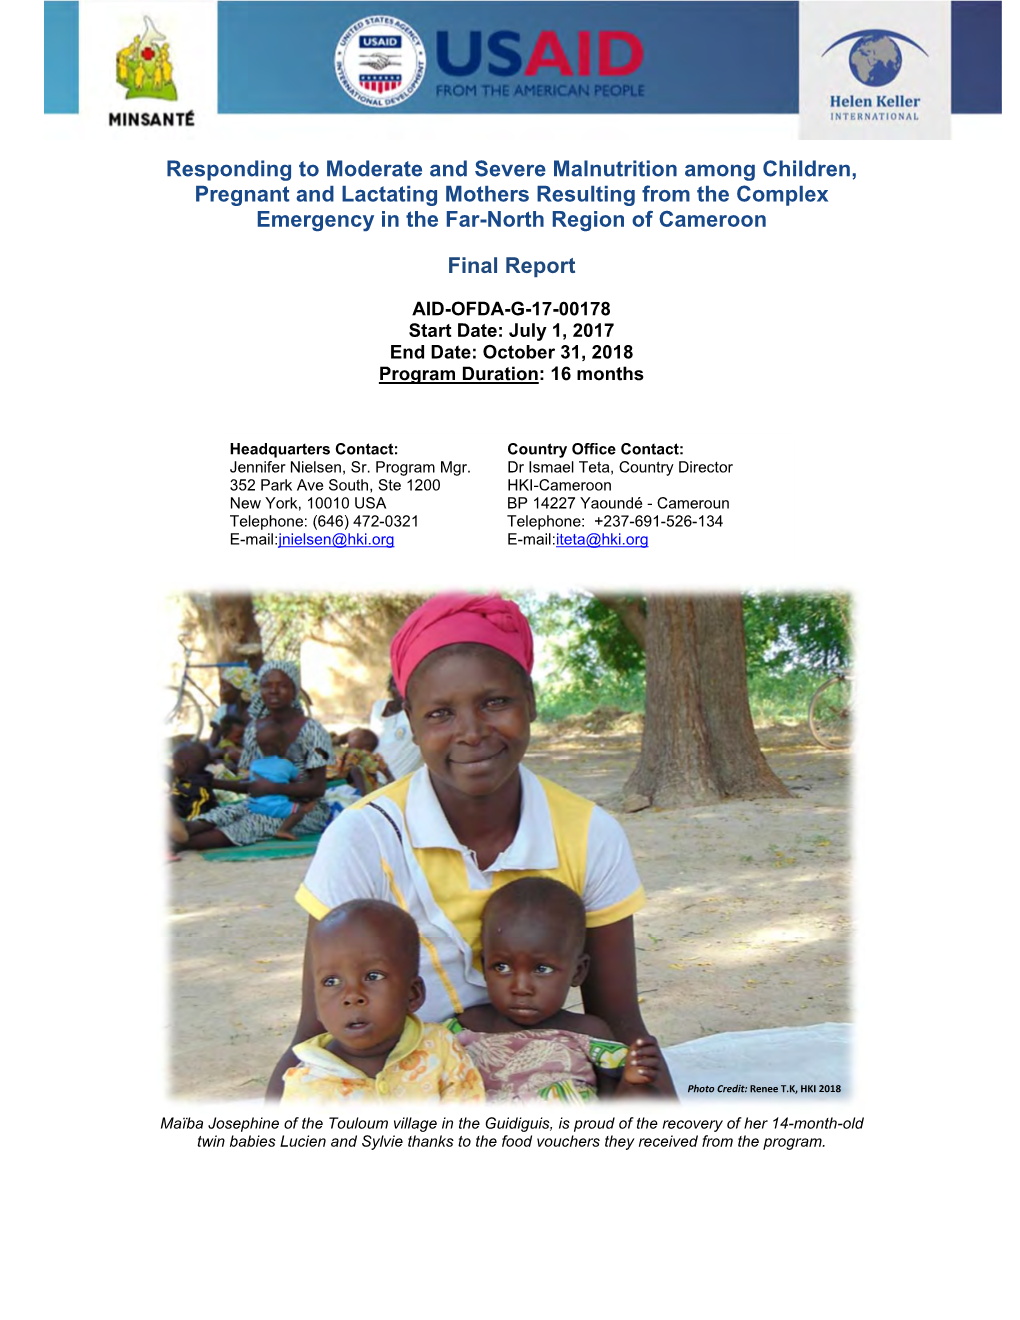 Responding to Moderate and Severe Malnutrition Among Children